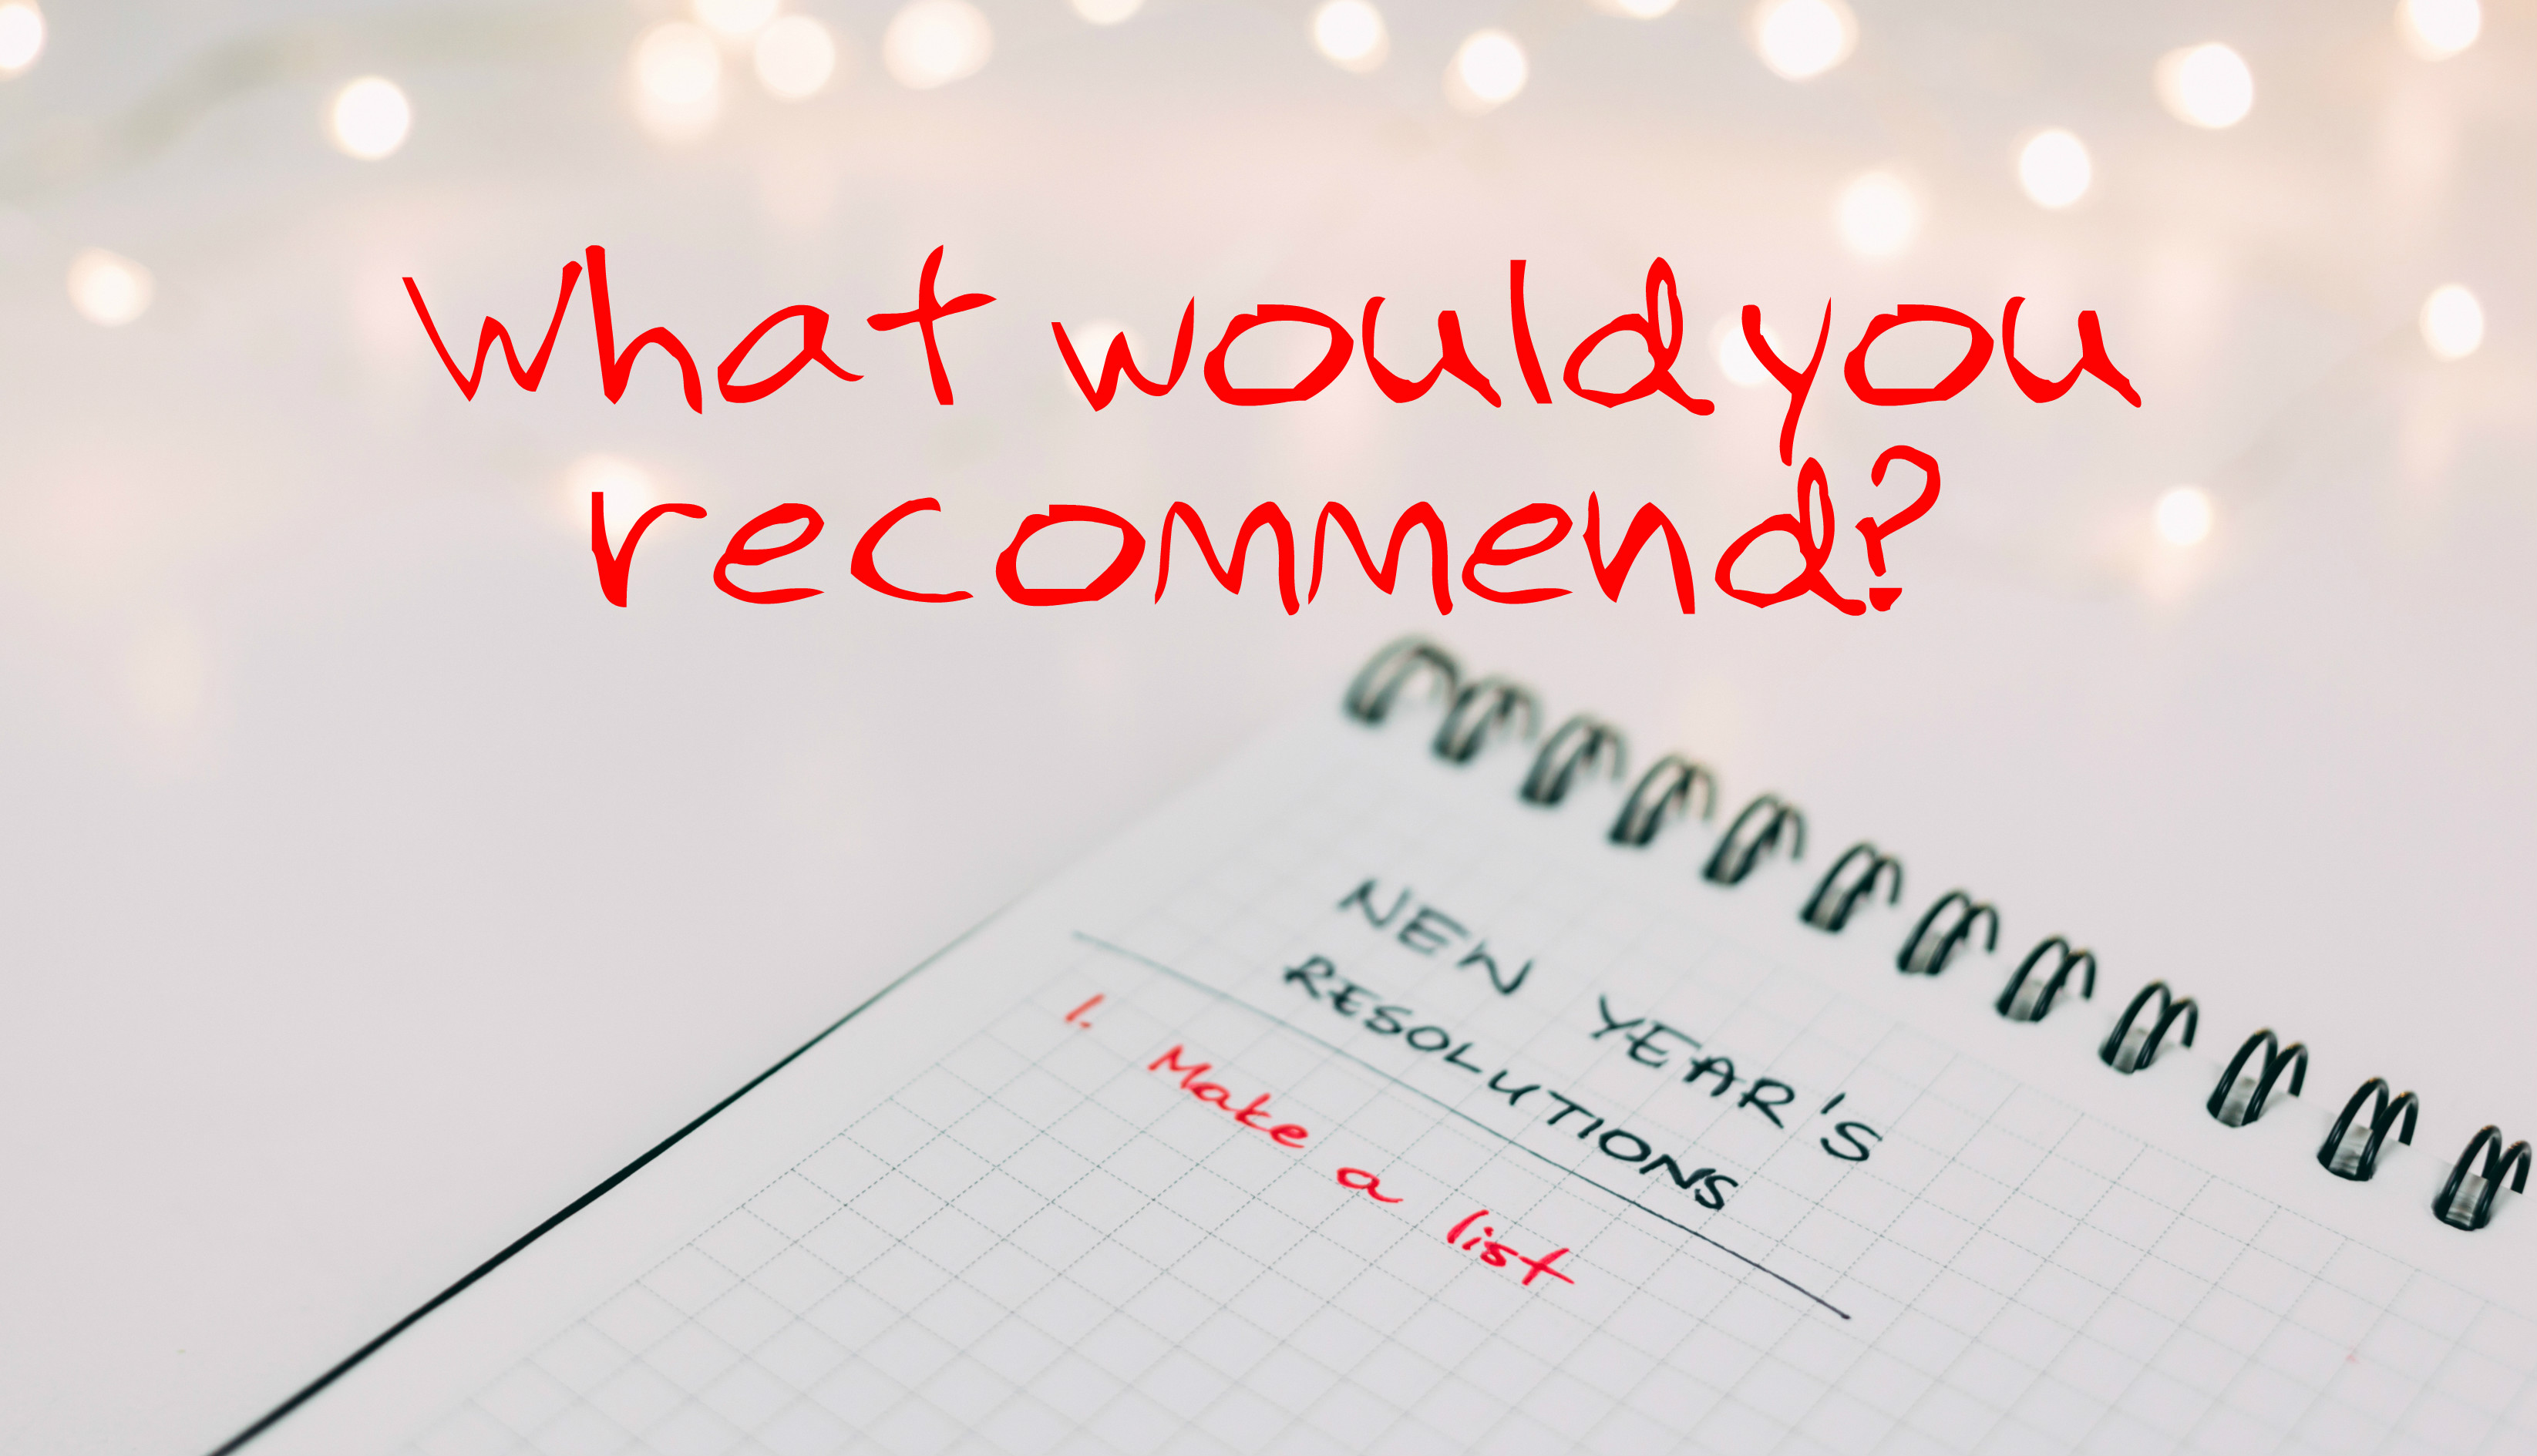 What would you recommend?